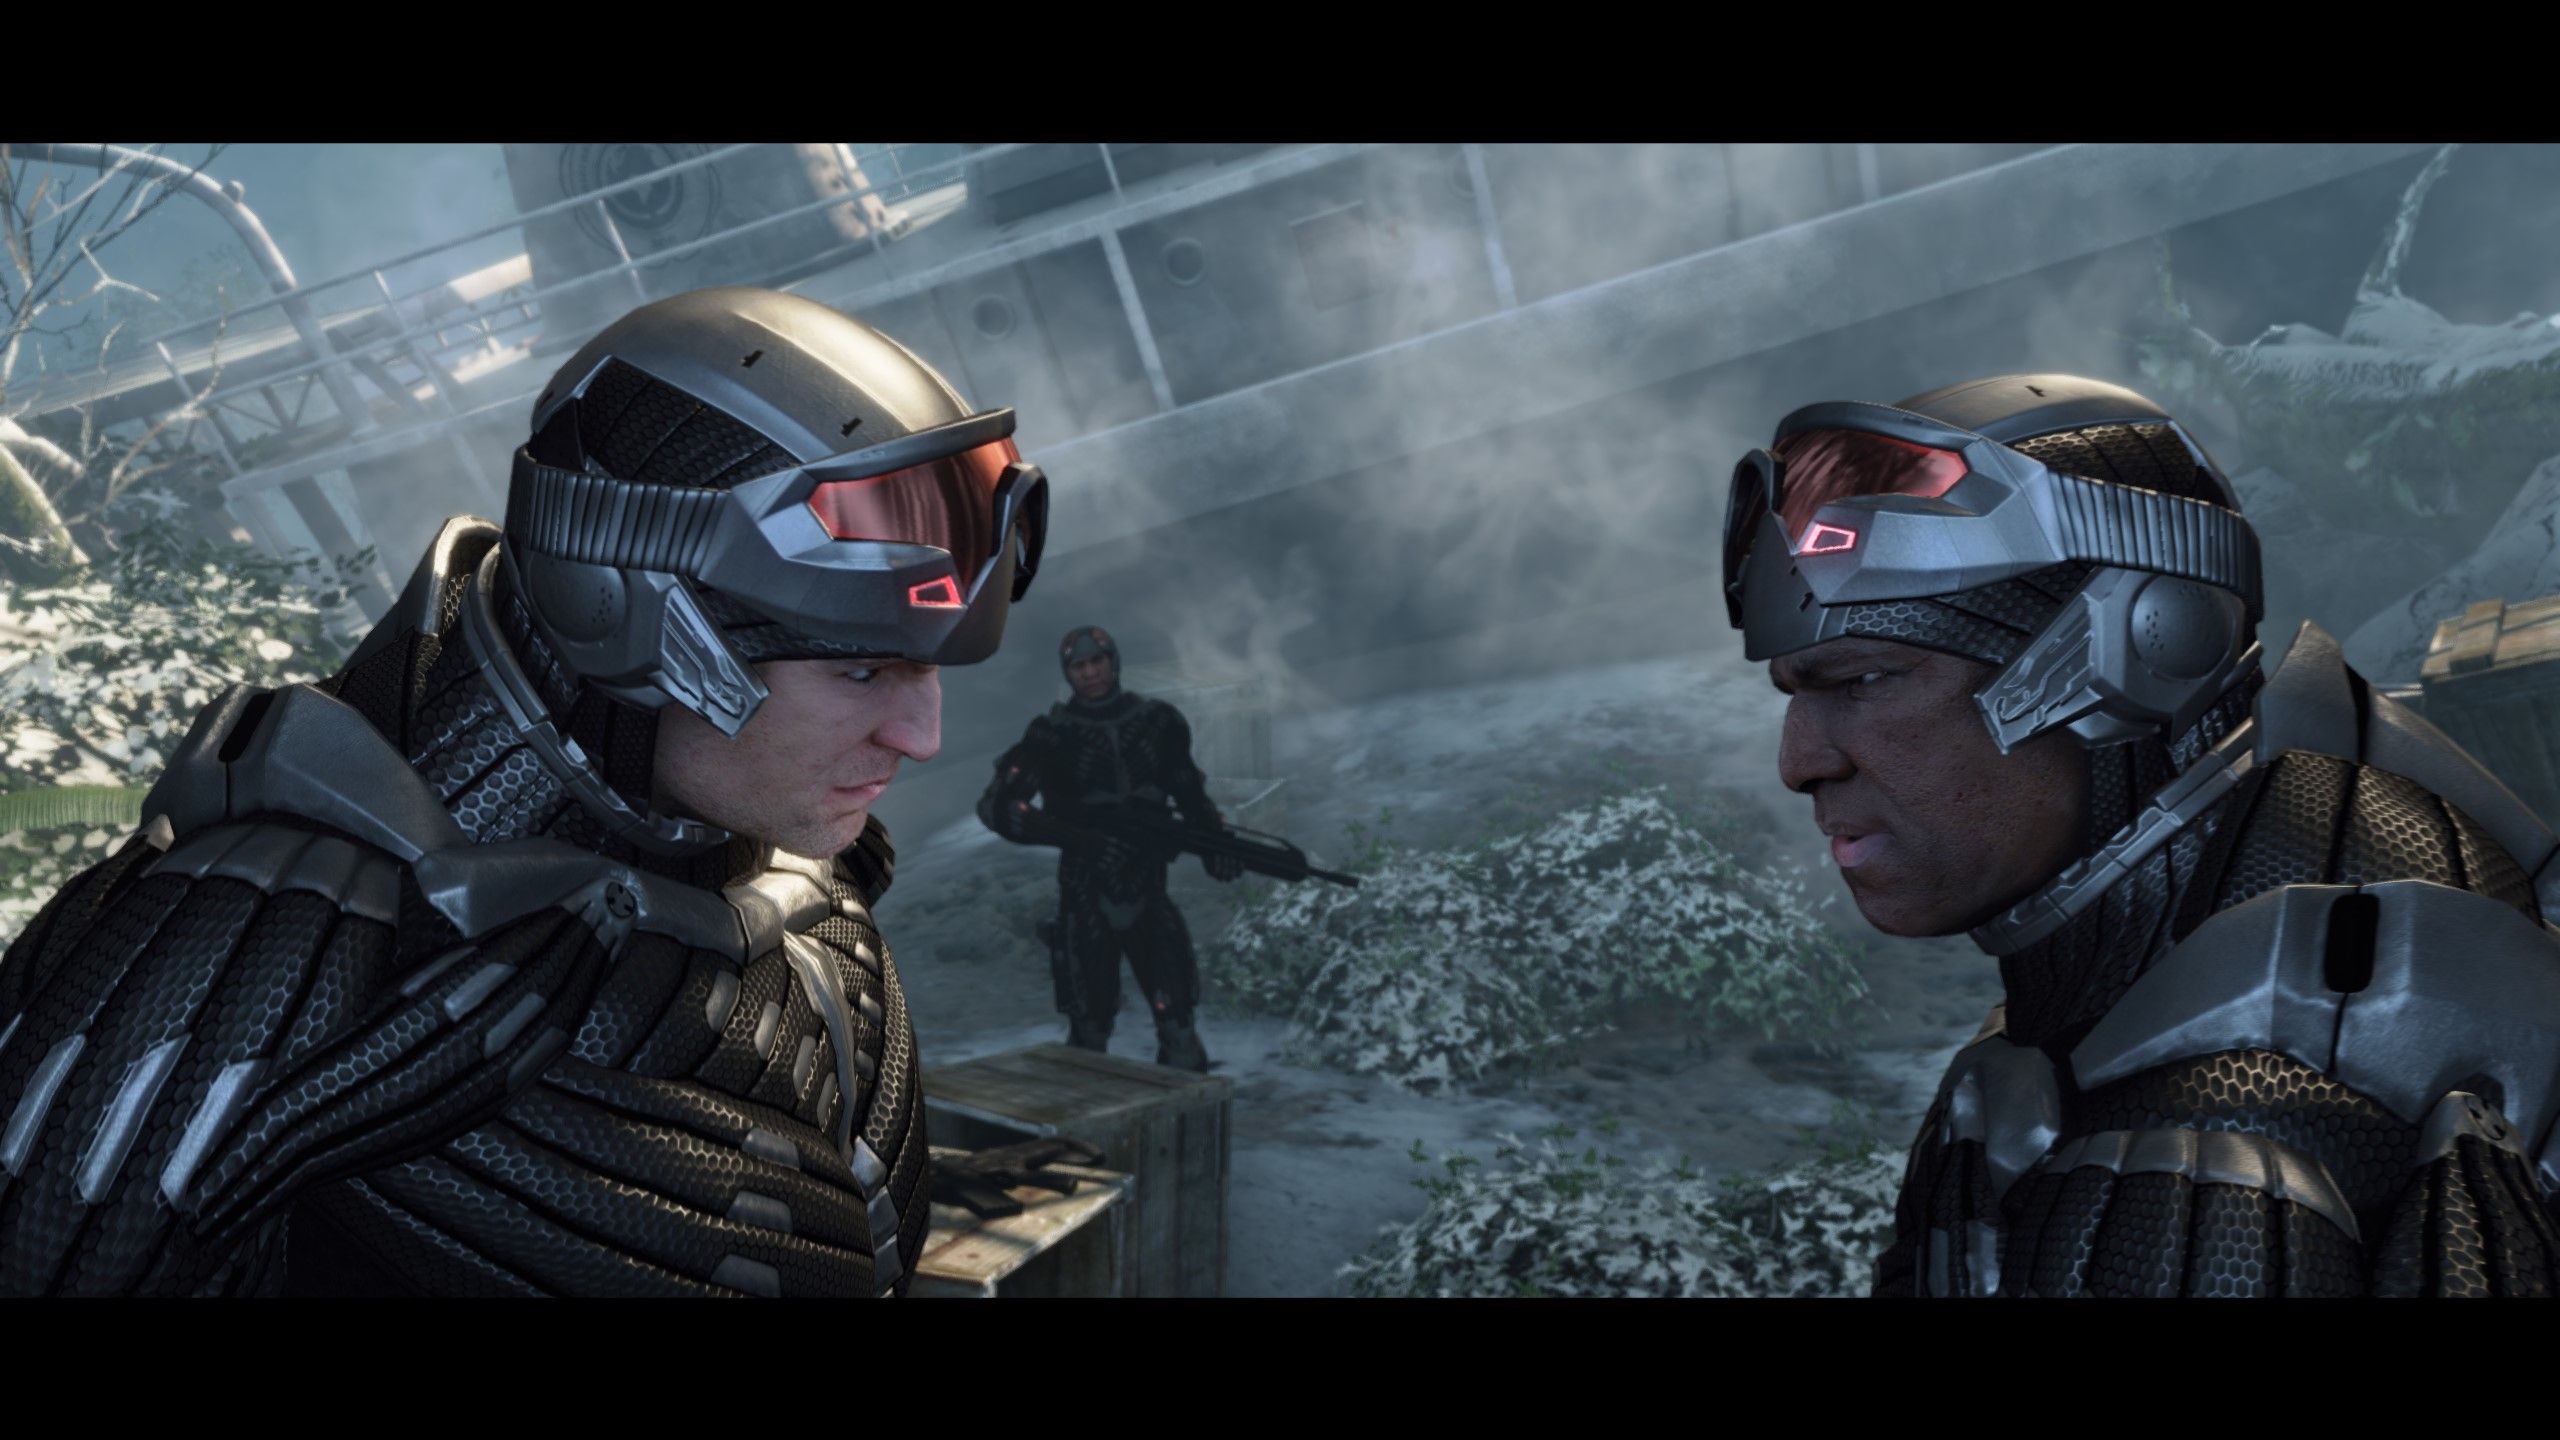 Remastered Nanosuit image Immersion Mod for Crysis